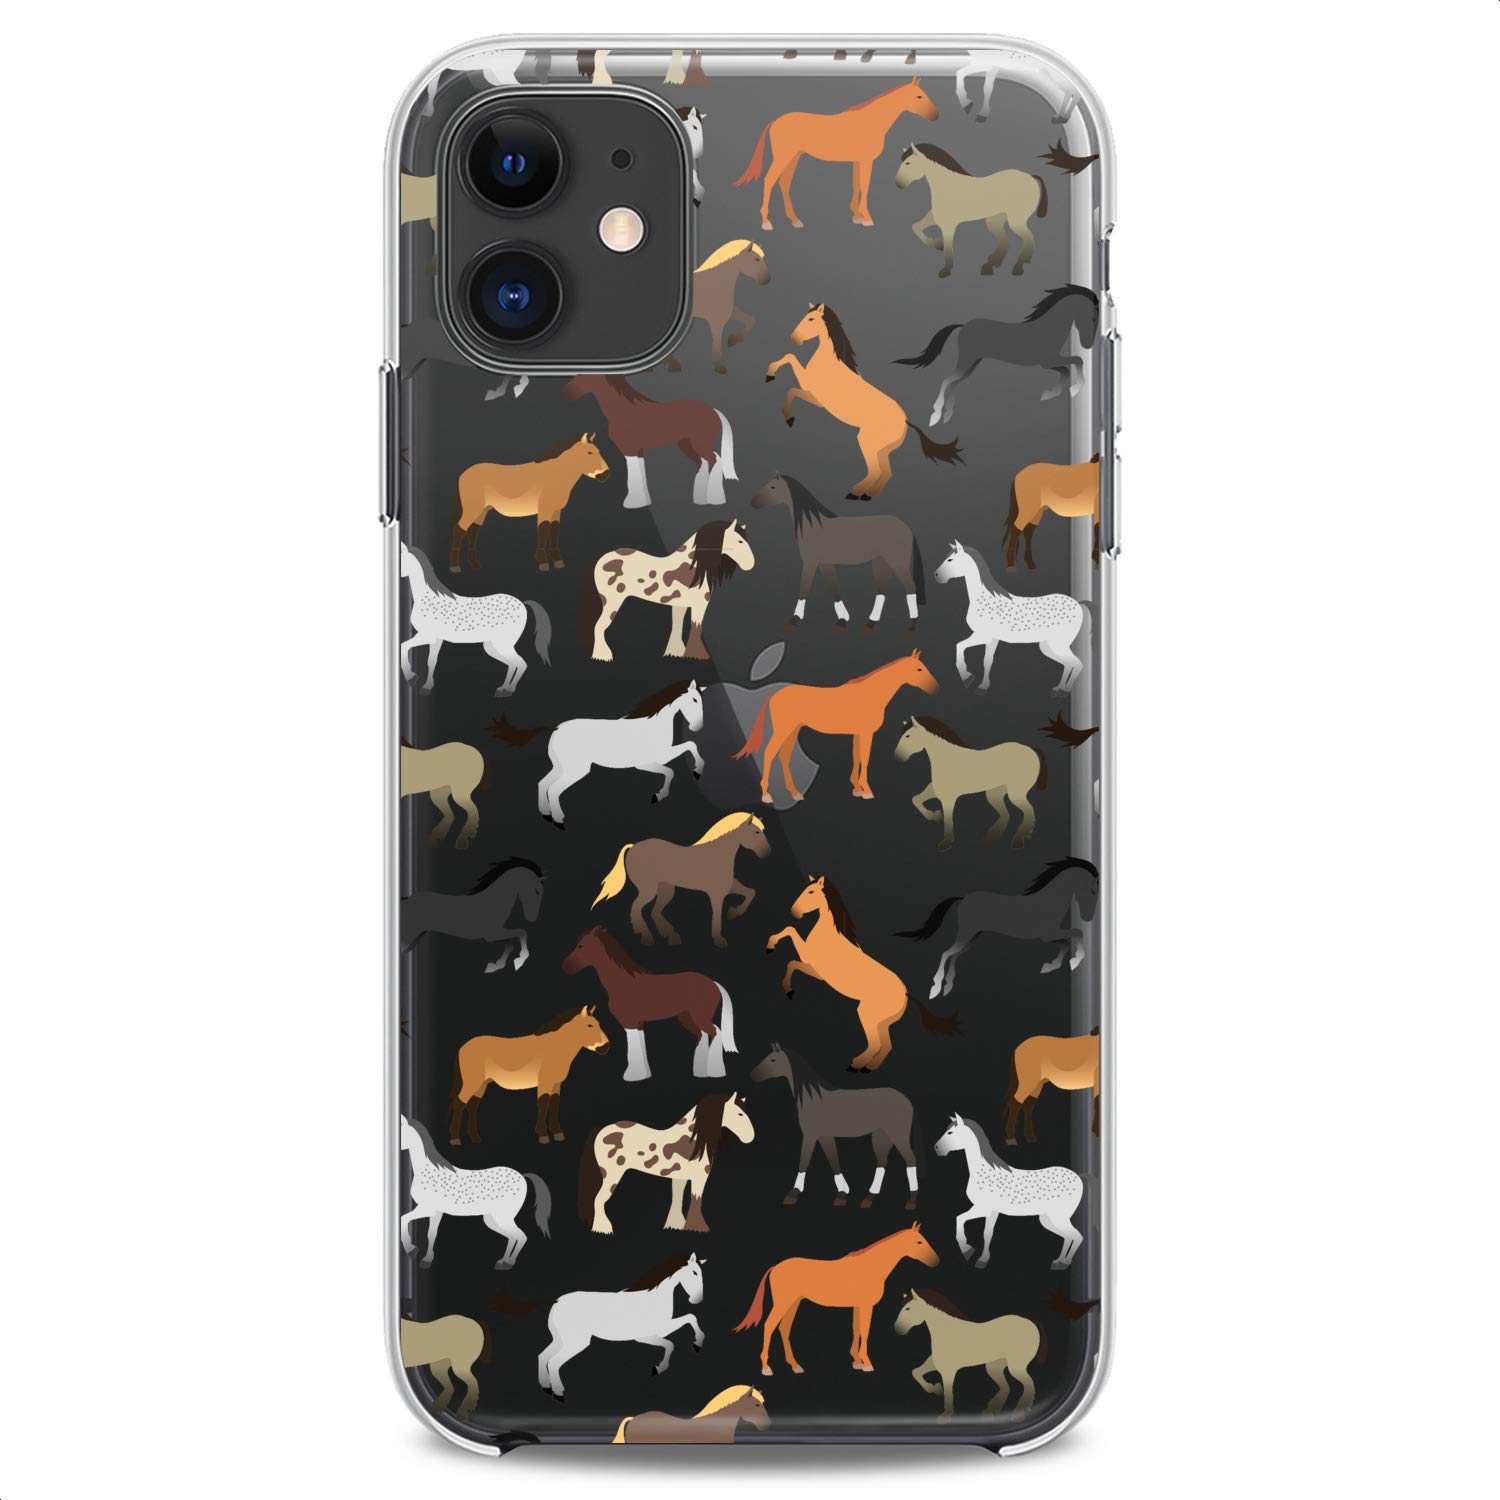 Cavka TPU Case Compatible with iPhone 14 Pro Max 13 12 Mini 11 Xs X 8 Plus Xr 7 SE Horse Pattern Animals Print Slim fit Soft Nature Cute Clear Woman Pony Cute Man Flexible Silicone Design Stylish